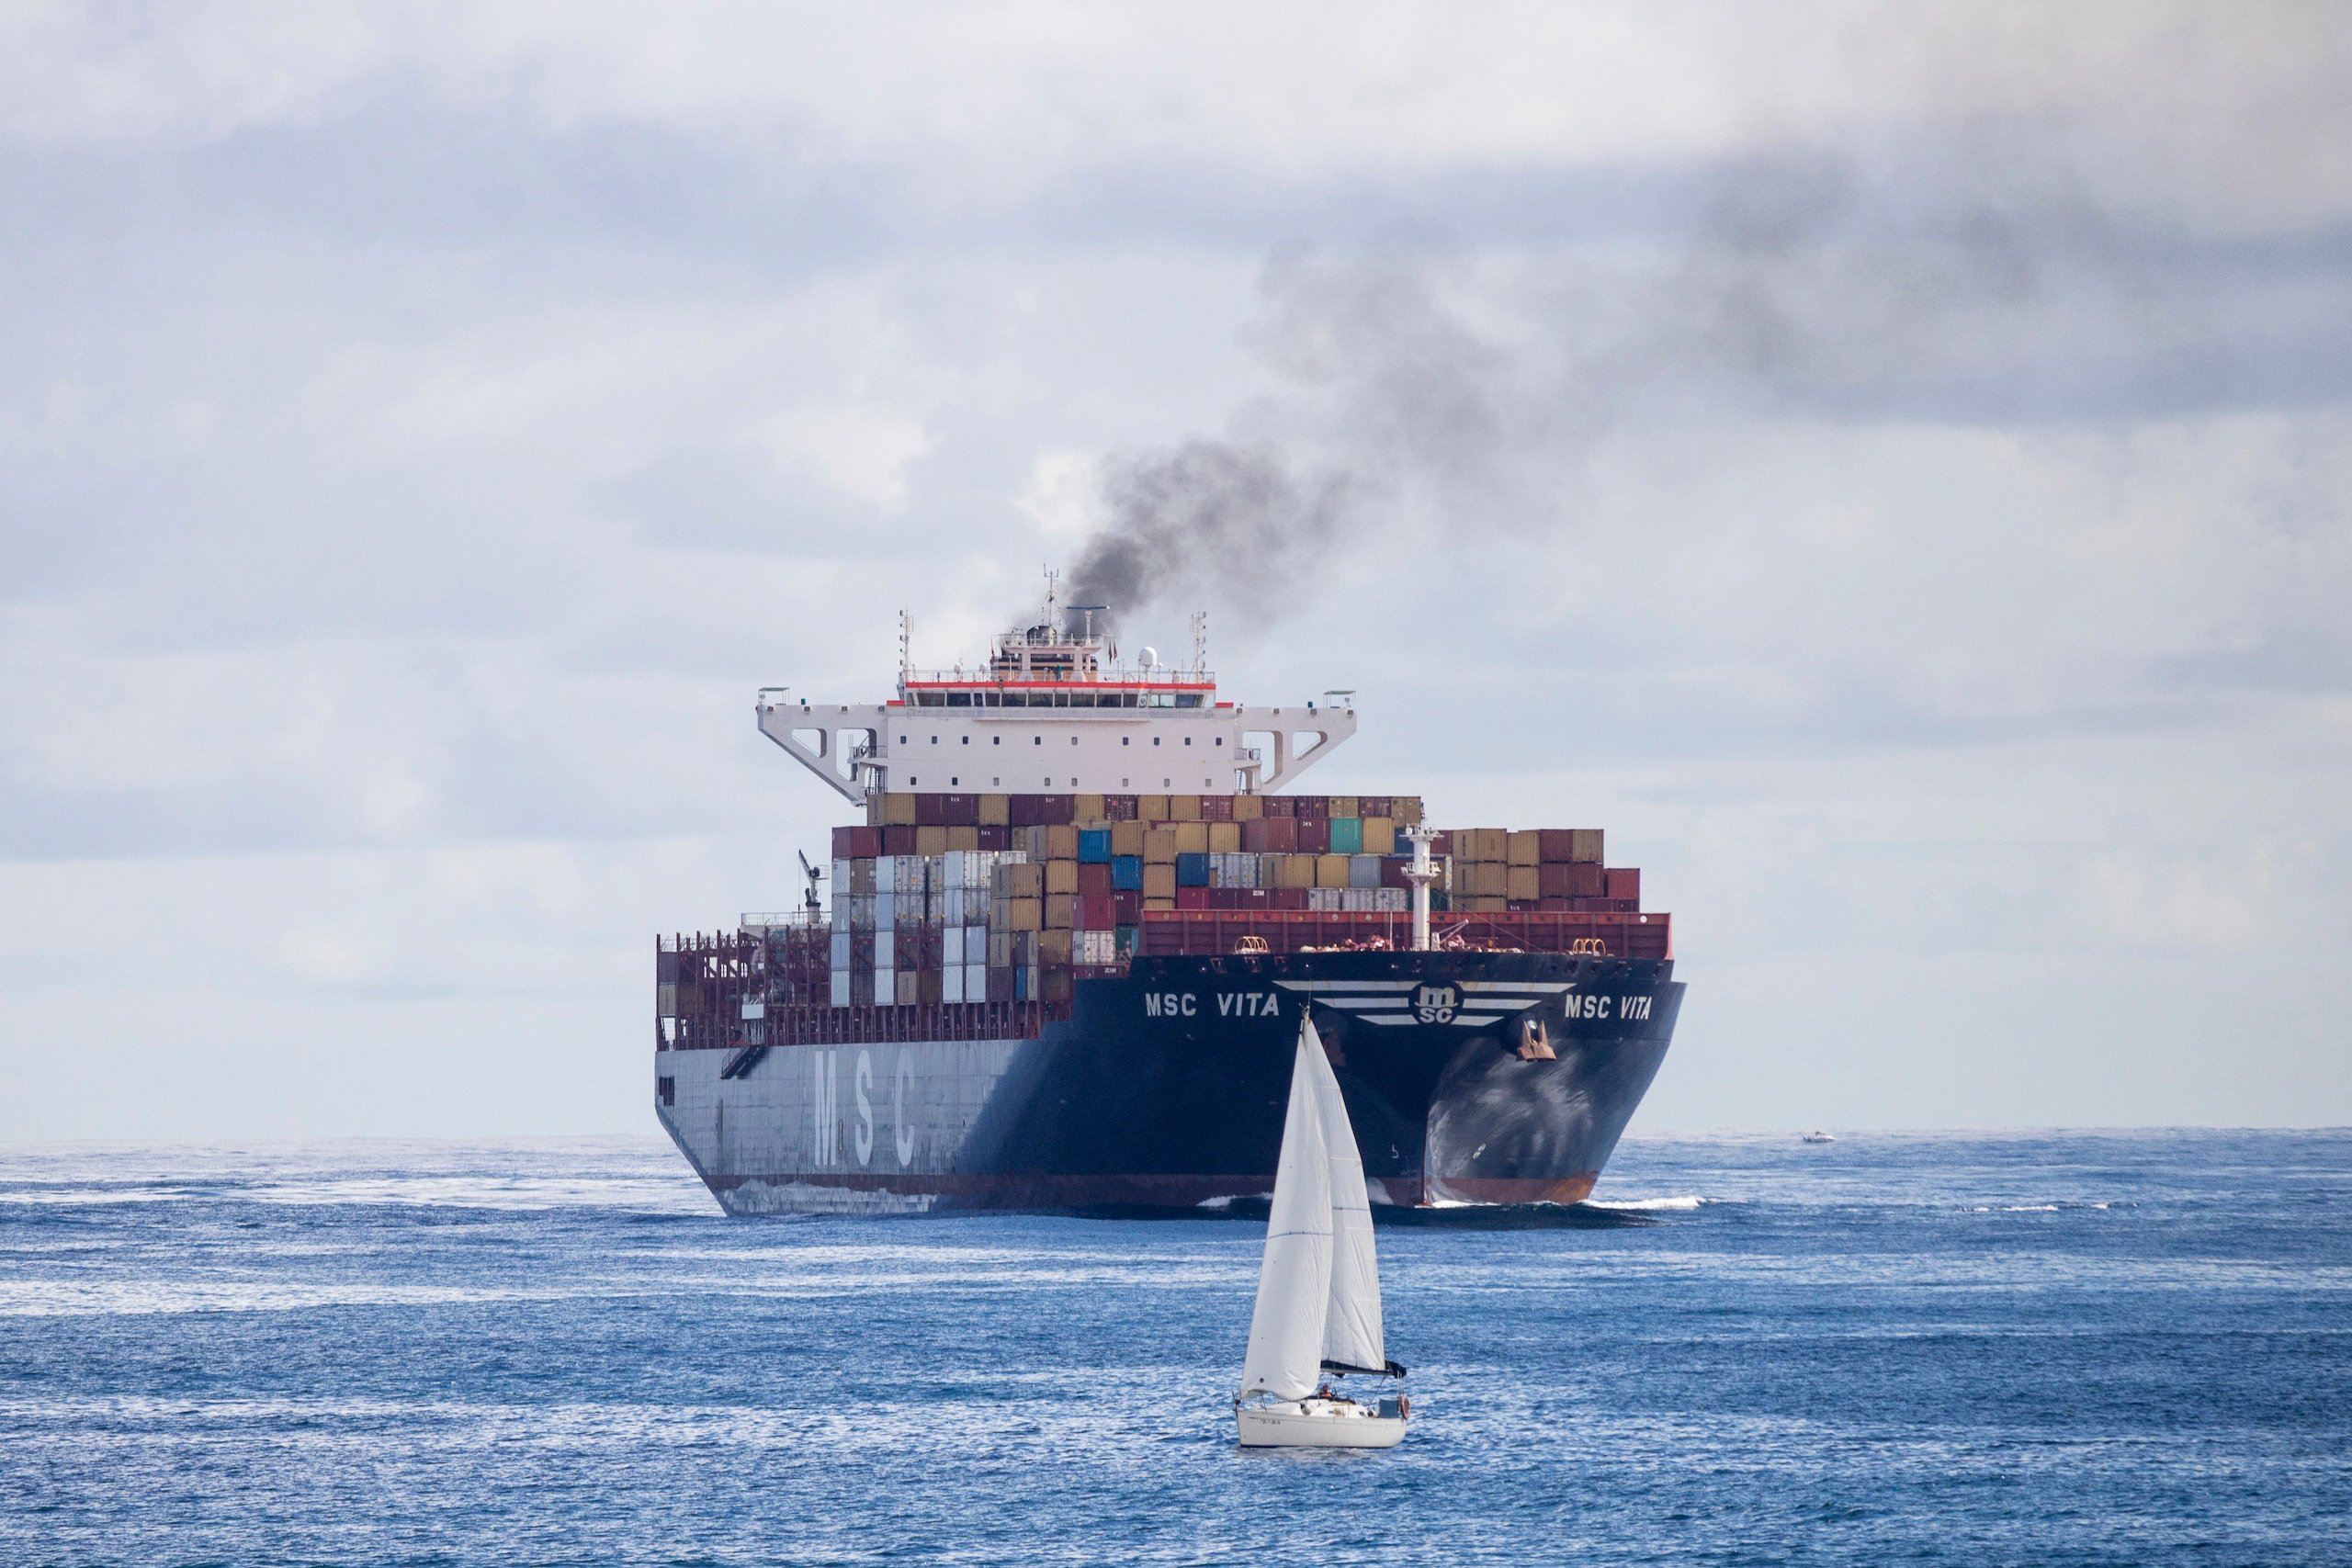 <p>The MSC Vita container ship entering Las Palmas Port in Gran Canaria, Spain. Shipping gulps up 5% of global oil demand and emits greenhouse gases equivalent to more than a billion tonnes of CO2 every year. (Image: Rory Hailes / Alamy)</p>